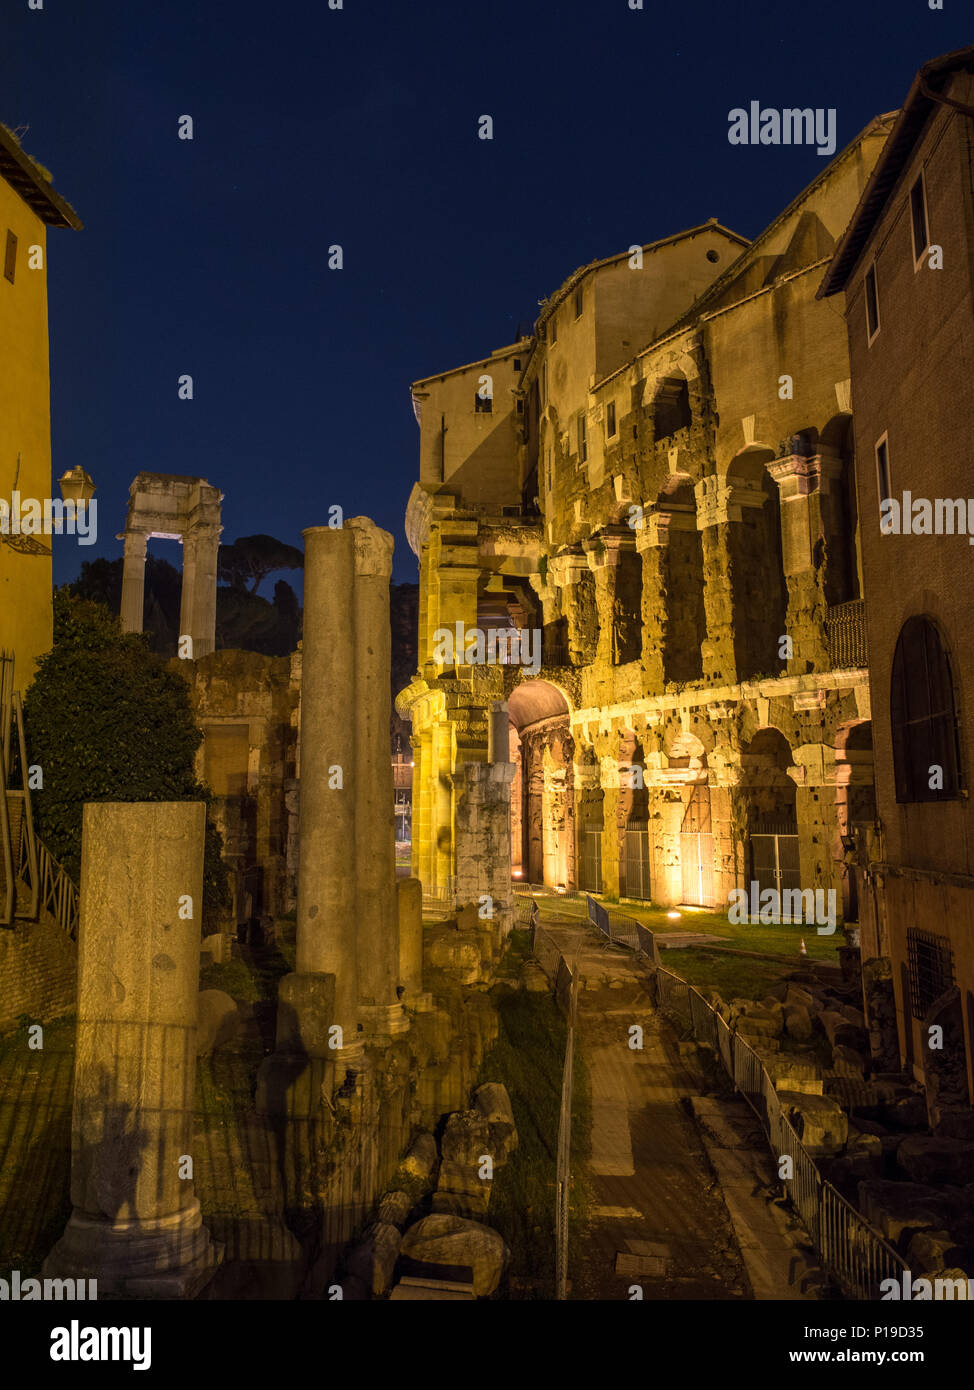 Rome, Italy - March 25, 2018: The ruins of the Roman Temple of Apollo Sosianus and the Theatre of Marcellus are lit up at night. Stock Photo